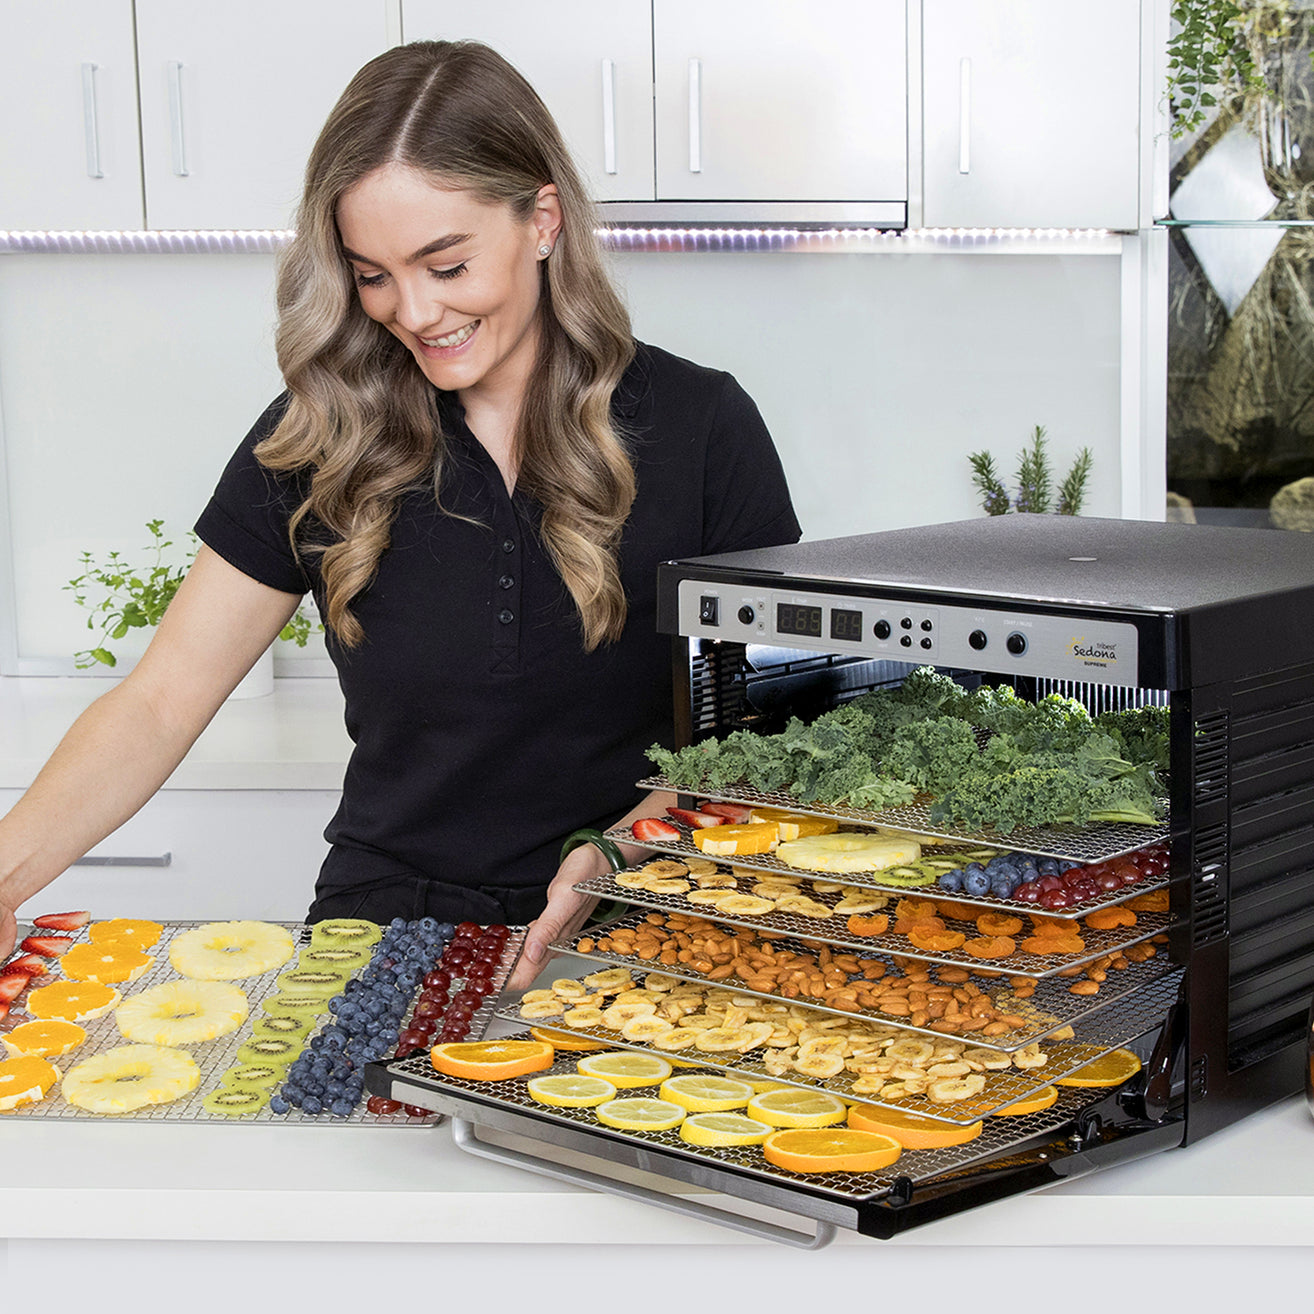 Sedona® Supreme Commercial Dehydrator with Stainless Steel Trays